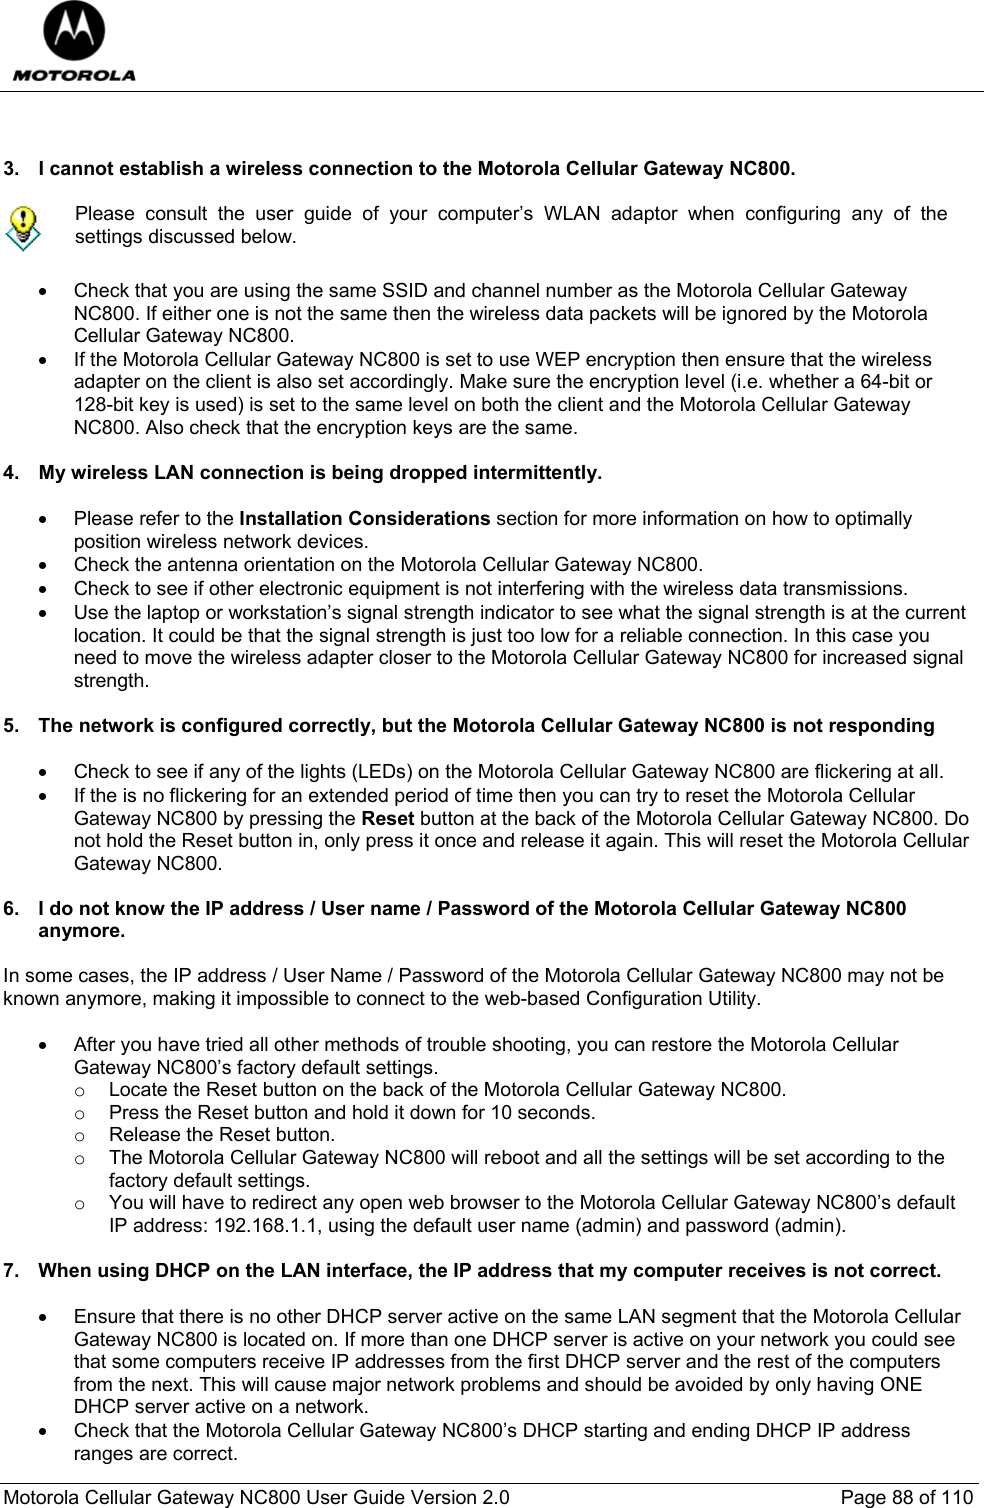  Motorola Cellular Gateway NC800 User Guide Version 2.0     Page 88 of 110    3.  I cannot establish a wireless connection to the Motorola Cellular Gateway NC800.   Please consult the user guide of your computer’s WLAN adaptor when configuring any of the settings discussed below.  •  Check that you are using the same SSID and channel number as the Motorola Cellular Gateway NC800. If either one is not the same then the wireless data packets will be ignored by the Motorola Cellular Gateway NC800. •  If the Motorola Cellular Gateway NC800 is set to use WEP encryption then ensure that the wireless adapter on the client is also set accordingly. Make sure the encryption level (i.e. whether a 64-bit or 128-bit key is used) is set to the same level on both the client and the Motorola Cellular Gateway NC800. Also check that the encryption keys are the same.  4.  My wireless LAN connection is being dropped intermittently.  •  Please refer to the Installation Considerations section for more information on how to optimally position wireless network devices. •  Check the antenna orientation on the Motorola Cellular Gateway NC800.  •  Check to see if other electronic equipment is not interfering with the wireless data transmissions. •  Use the laptop or workstation’s signal strength indicator to see what the signal strength is at the current location. It could be that the signal strength is just too low for a reliable connection. In this case you need to move the wireless adapter closer to the Motorola Cellular Gateway NC800 for increased signal strength.  5.  The network is configured correctly, but the Motorola Cellular Gateway NC800 is not responding  •  Check to see if any of the lights (LEDs) on the Motorola Cellular Gateway NC800 are flickering at all. •  If the is no flickering for an extended period of time then you can try to reset the Motorola Cellular Gateway NC800 by pressing the Reset button at the back of the Motorola Cellular Gateway NC800. Do not hold the Reset button in, only press it once and release it again. This will reset the Motorola Cellular Gateway NC800.  6.  I do not know the IP address / User name / Password of the Motorola Cellular Gateway NC800 anymore.  In some cases, the IP address / User Name / Password of the Motorola Cellular Gateway NC800 may not be known anymore, making it impossible to connect to the web-based Configuration Utility.   •  After you have tried all other methods of trouble shooting, you can restore the Motorola Cellular Gateway NC800’s factory default settings. o  Locate the Reset button on the back of the Motorola Cellular Gateway NC800.  o  Press the Reset button and hold it down for 10 seconds. o  Release the Reset button. o  The Motorola Cellular Gateway NC800 will reboot and all the settings will be set according to the factory default settings. o  You will have to redirect any open web browser to the Motorola Cellular Gateway NC800’s default IP address: 192.168.1.1, using the default user name (admin) and password (admin).  7.  When using DHCP on the LAN interface, the IP address that my computer receives is not correct.  •  Ensure that there is no other DHCP server active on the same LAN segment that the Motorola Cellular Gateway NC800 is located on. If more than one DHCP server is active on your network you could see that some computers receive IP addresses from the first DHCP server and the rest of the computers from the next. This will cause major network problems and should be avoided by only having ONE DHCP server active on a network.  •  Check that the Motorola Cellular Gateway NC800’s DHCP starting and ending DHCP IP address ranges are correct. 